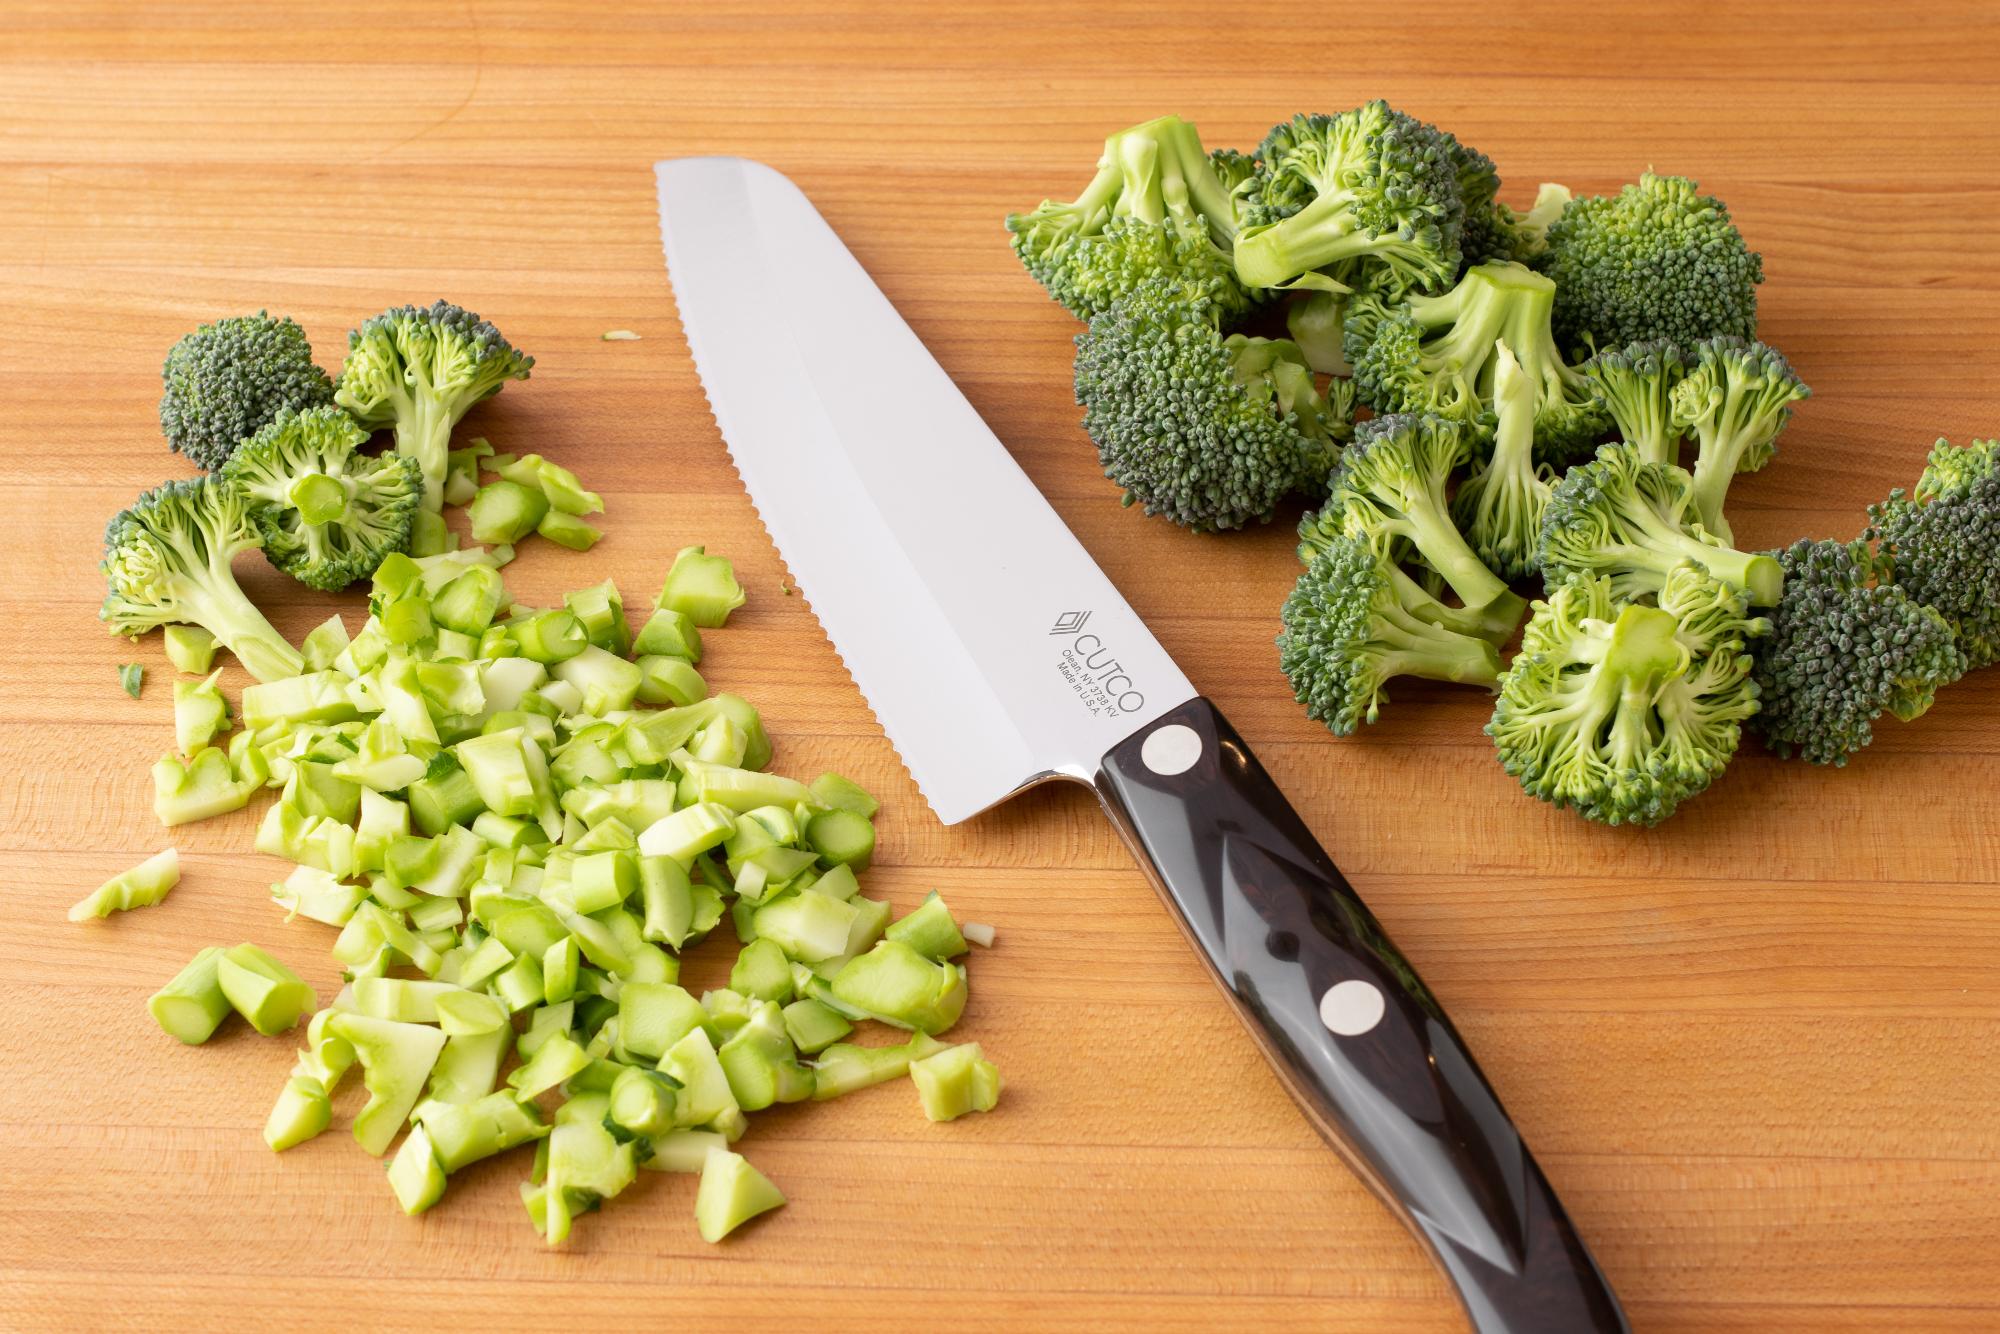 The Gourmet Prep Knife is perfect for cutting broccoli florets.